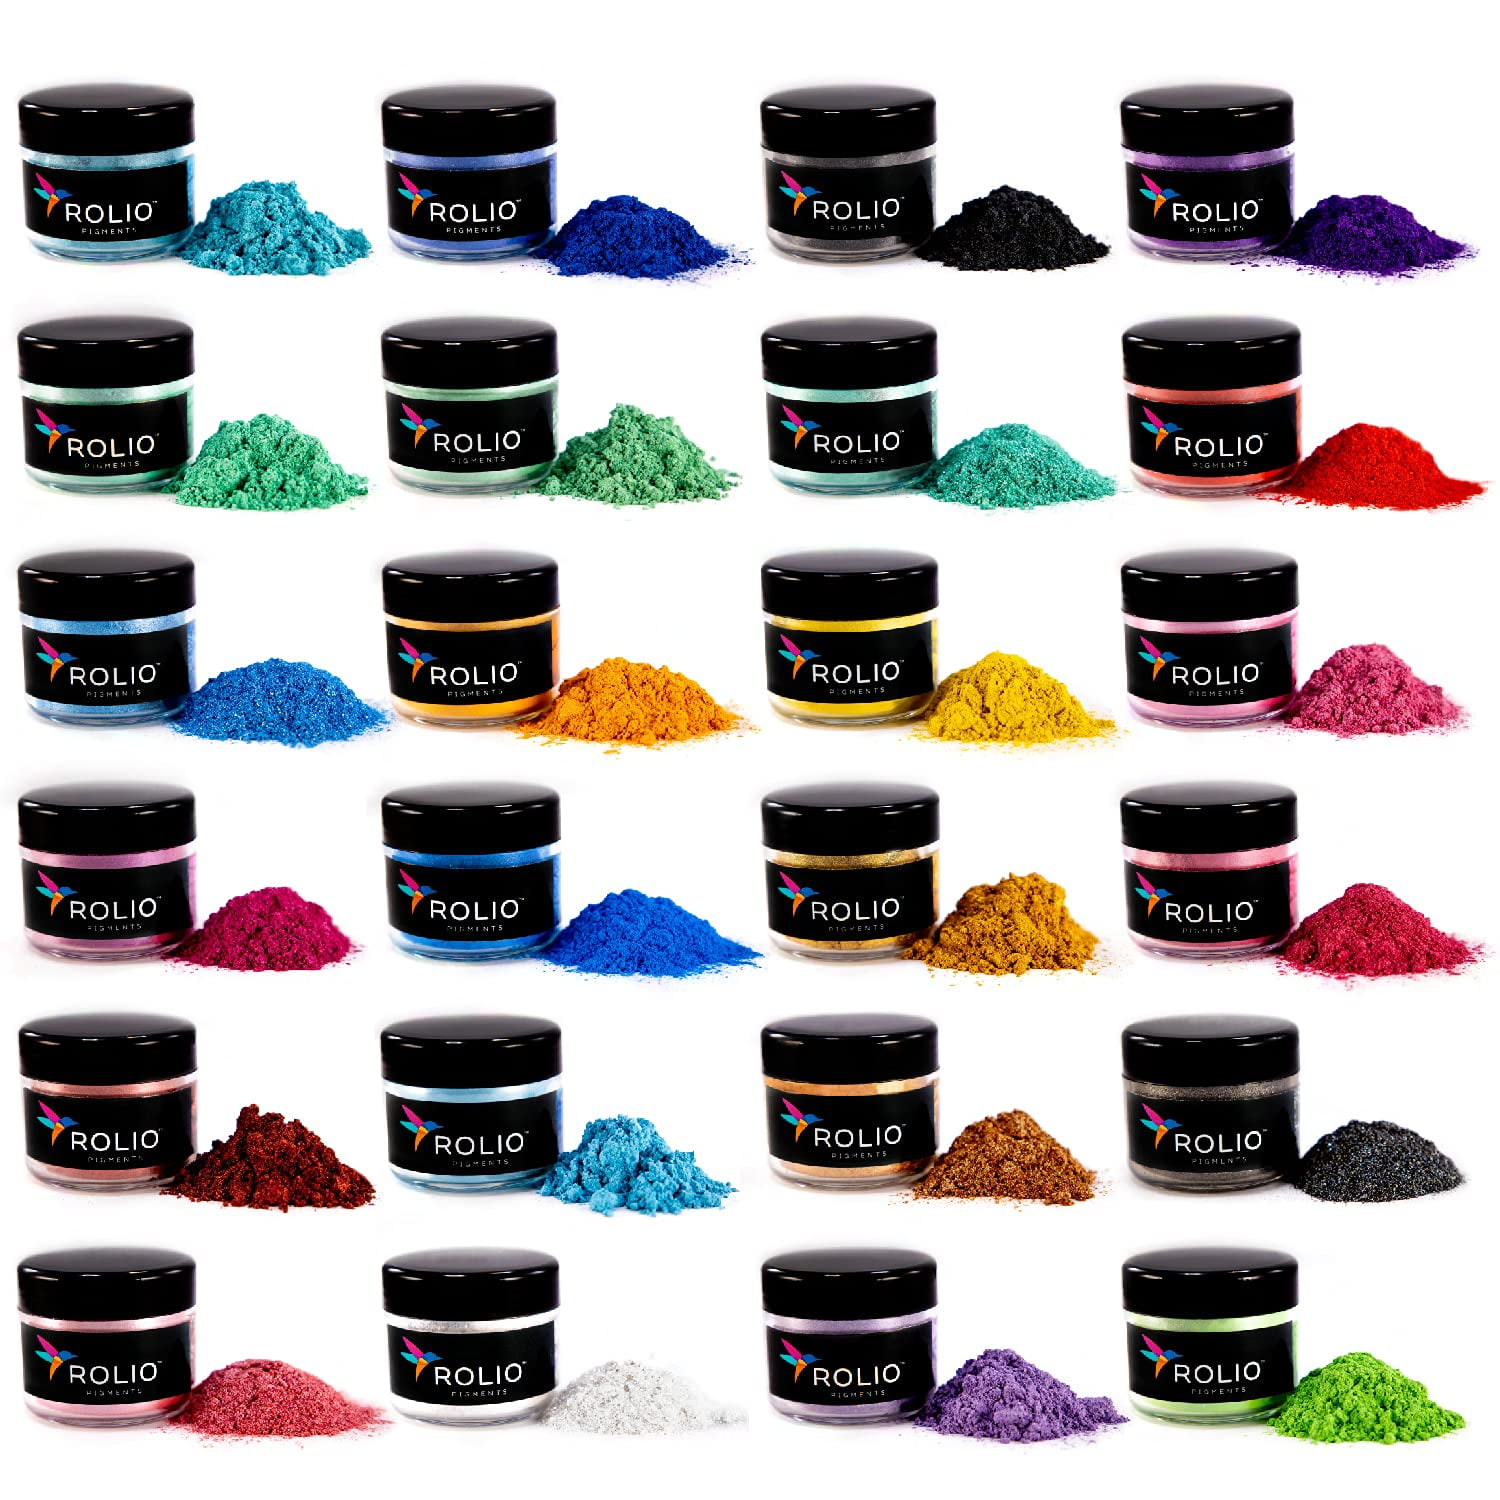 Rolio - Mica Powder - 12 Jars of Pearlescent Color Pigment  for Paint, Dye, Soap Making, Nail Polish, Epoxy Resin, Candle Making, Bath  Bombs, Slime - Autumn Hues 